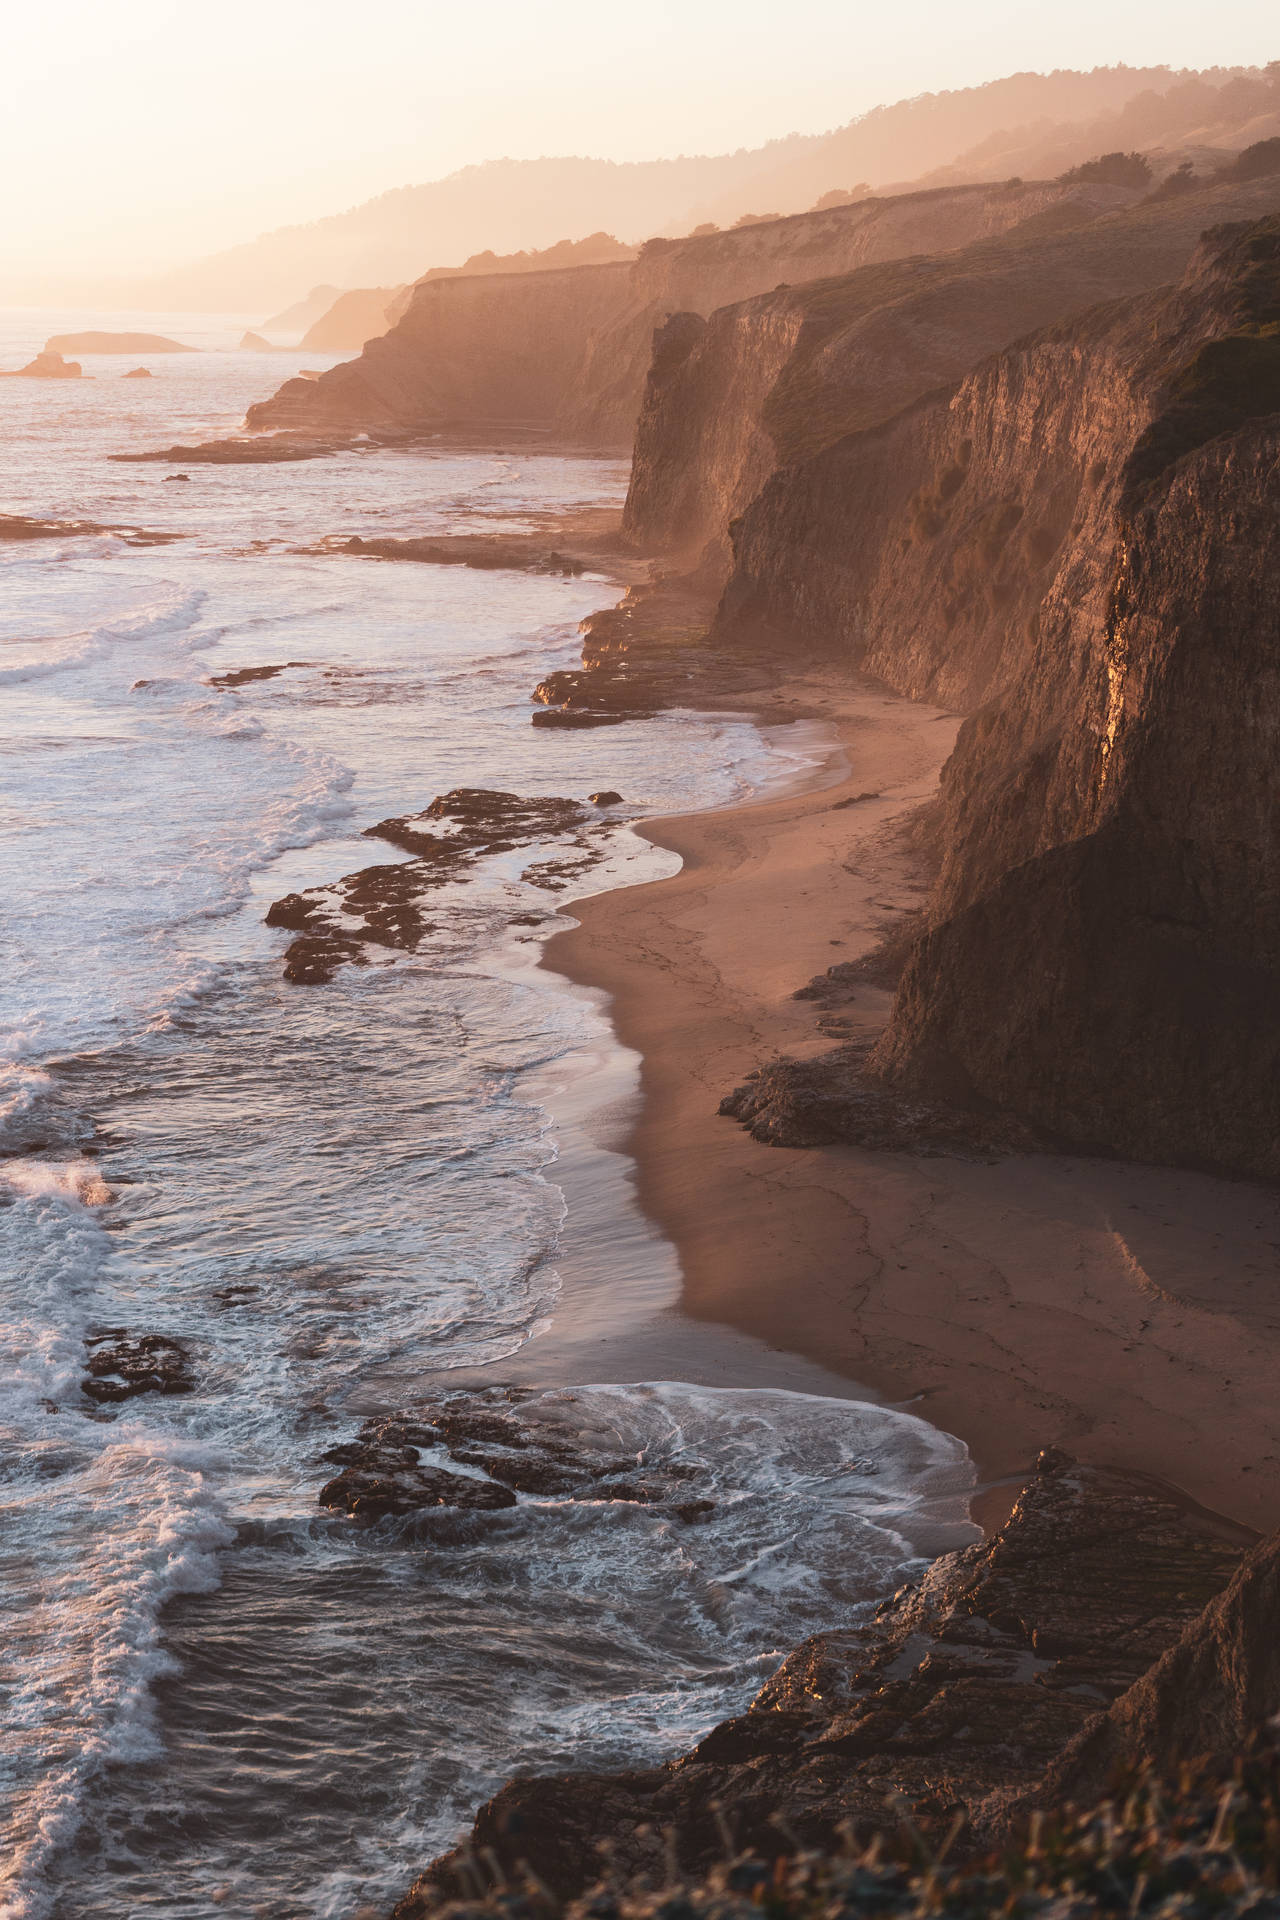 A photo of the ocean meeting the cliffs at sunset - Coast